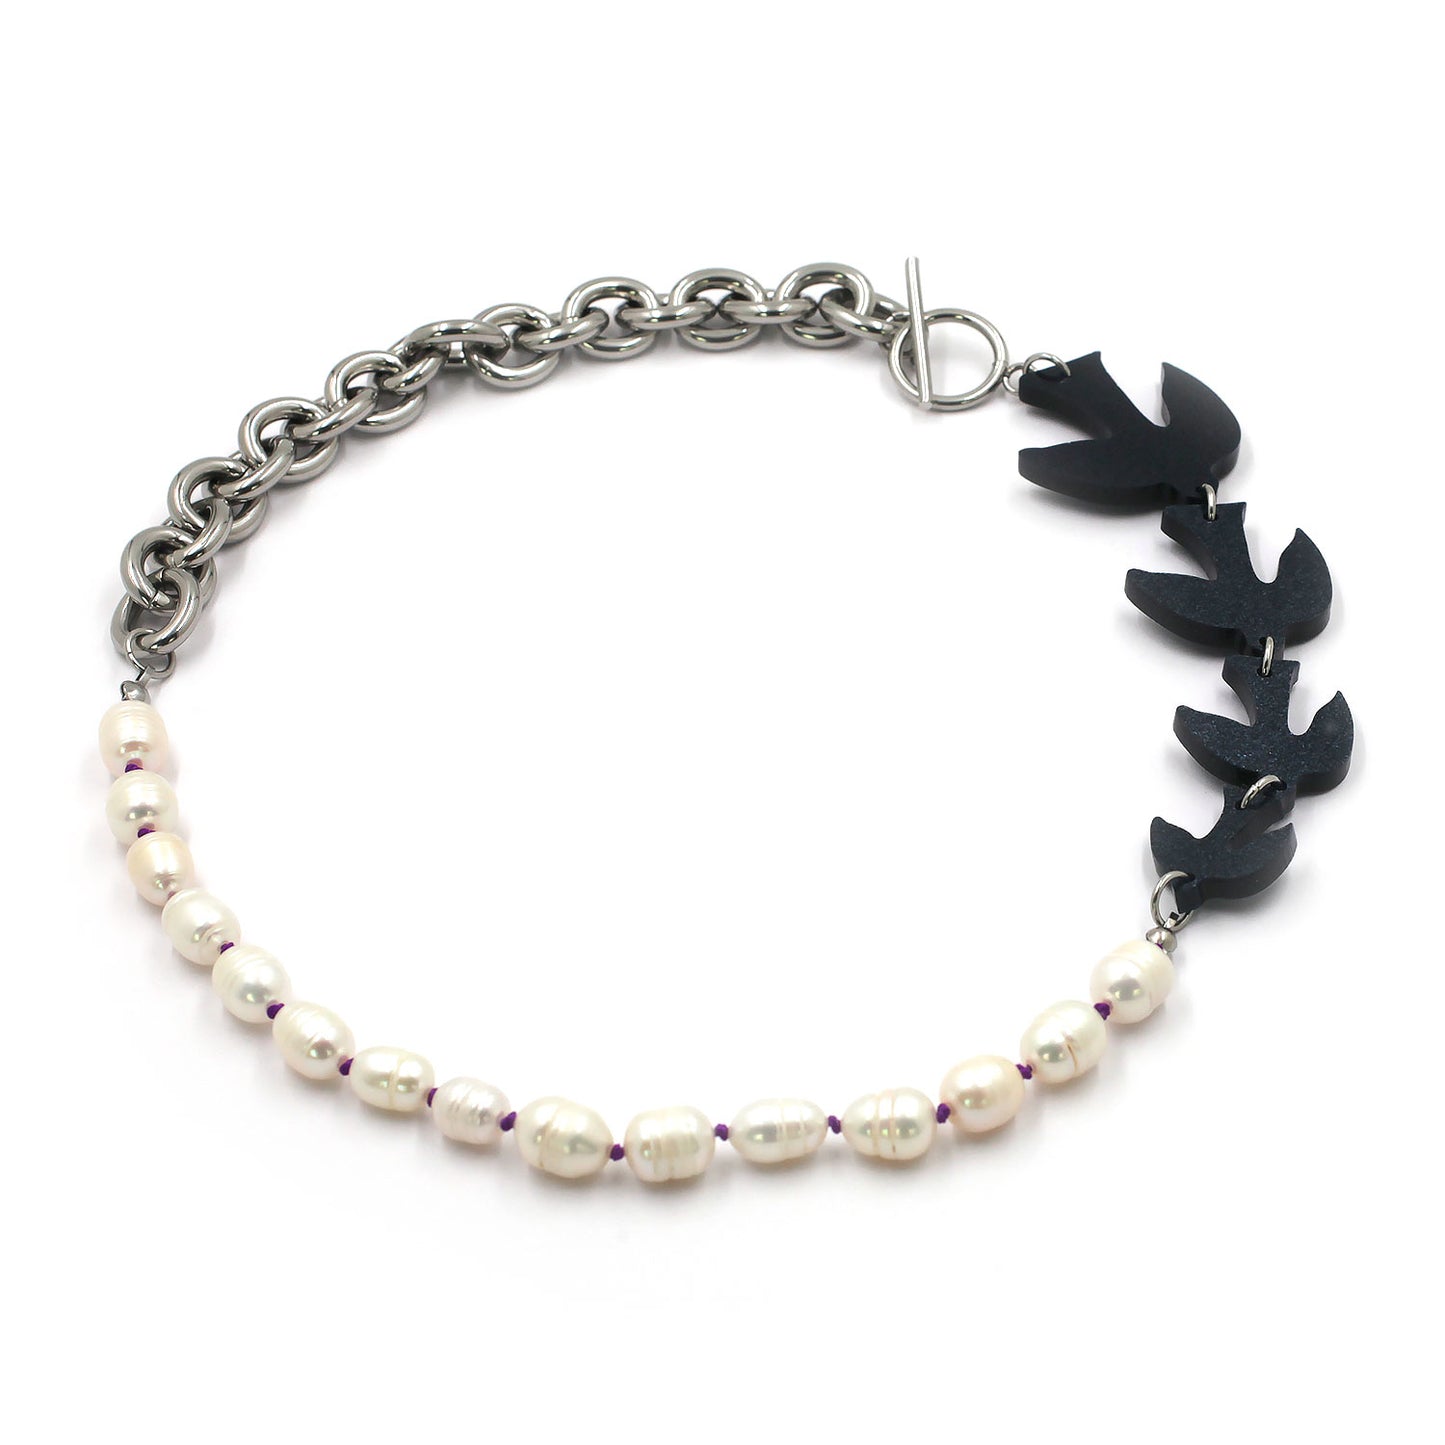 this is a laser cut birds necklace with pearls and chunky chain and a t clasp closure on a white background.